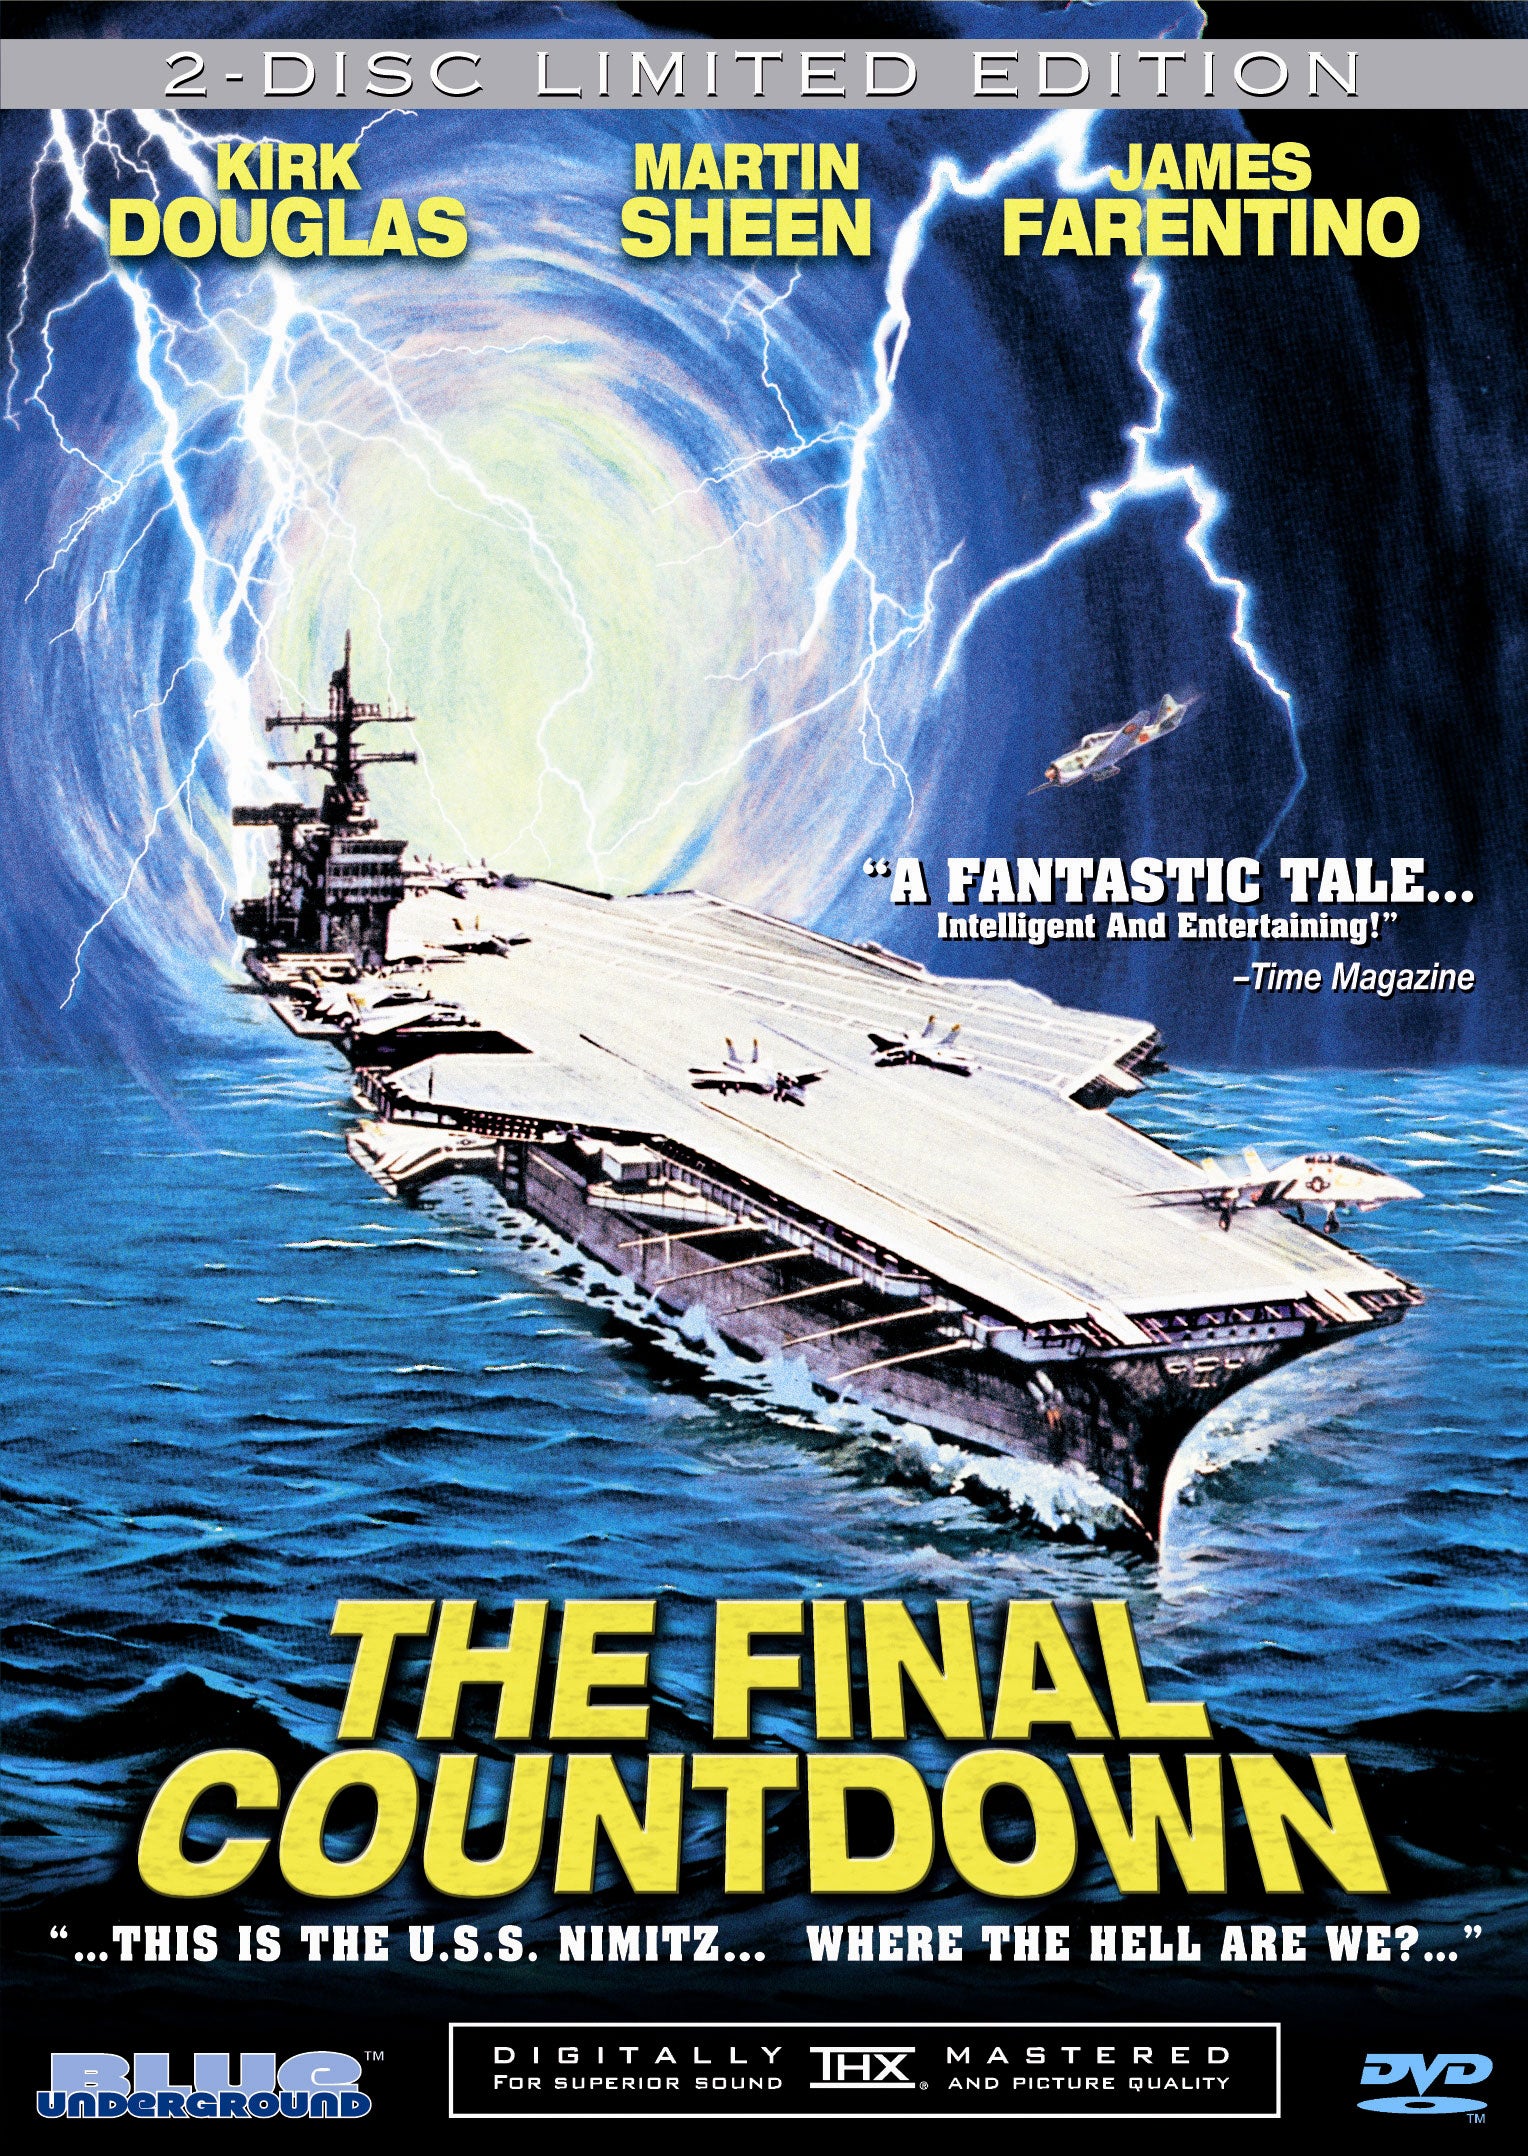 THE FINAL COUNTDOWN (2-DISC LIMITED EDITION) DVD